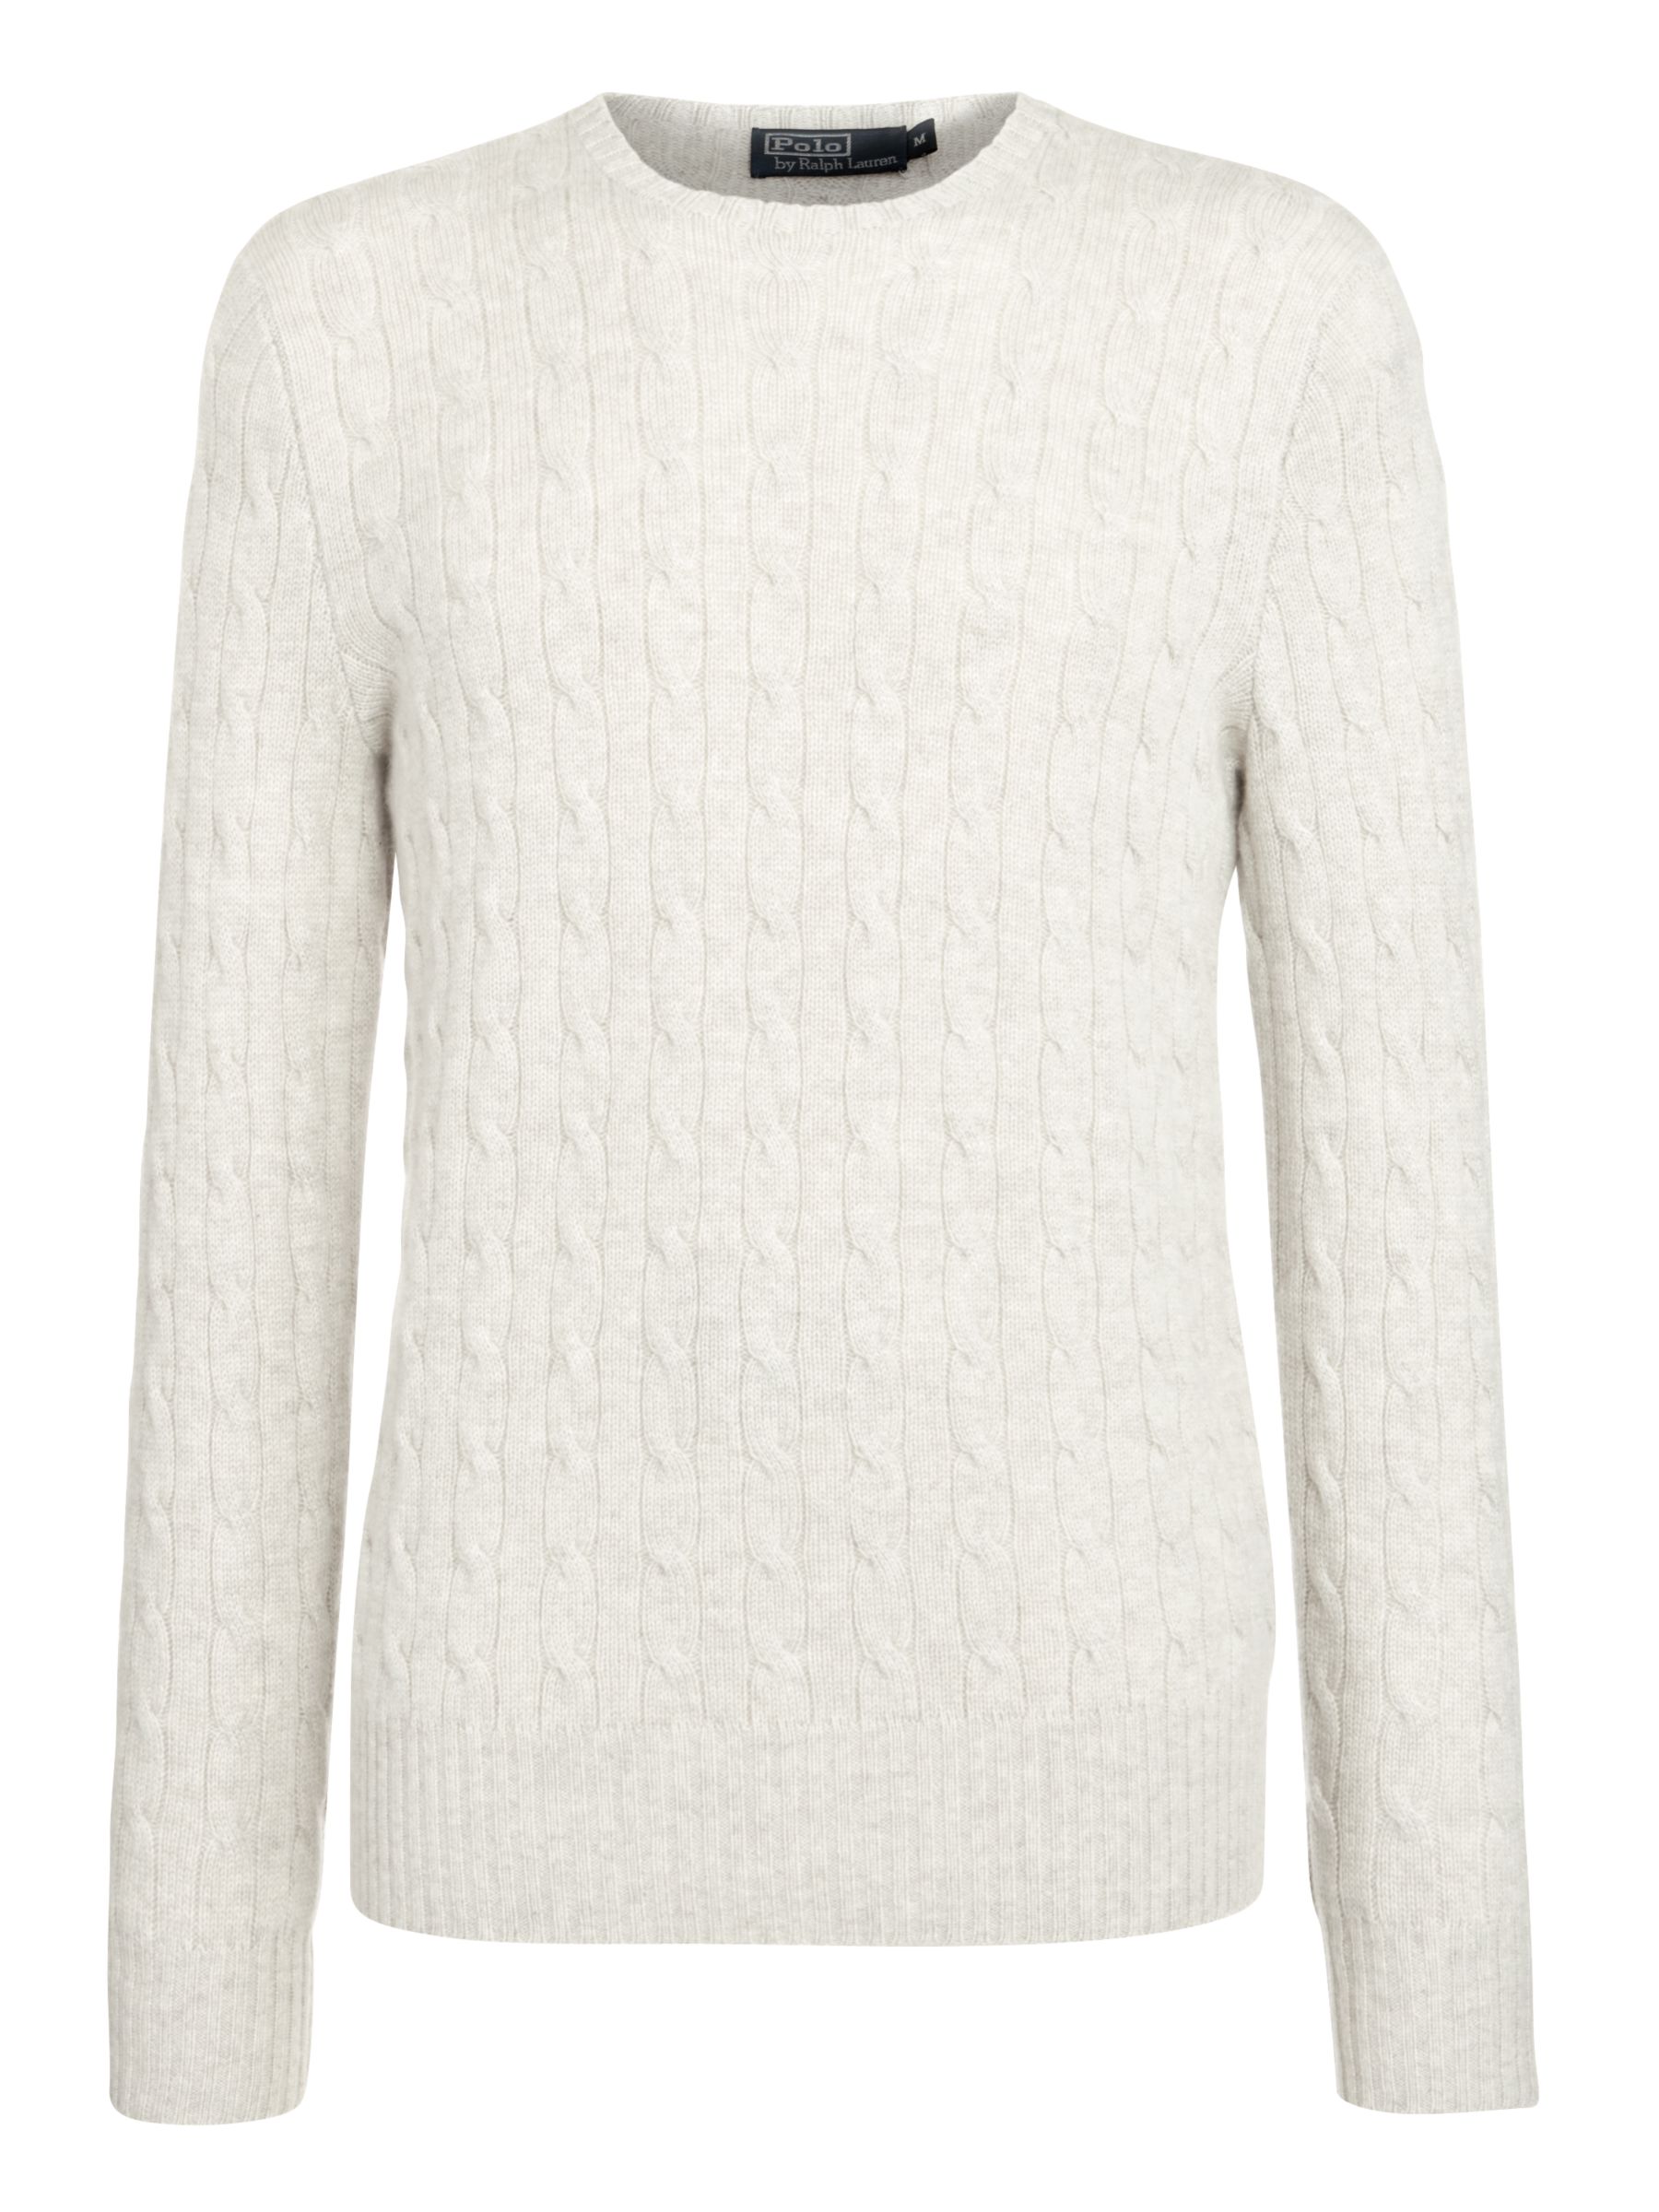 polo ralph lauren mens cashmere cable sweater